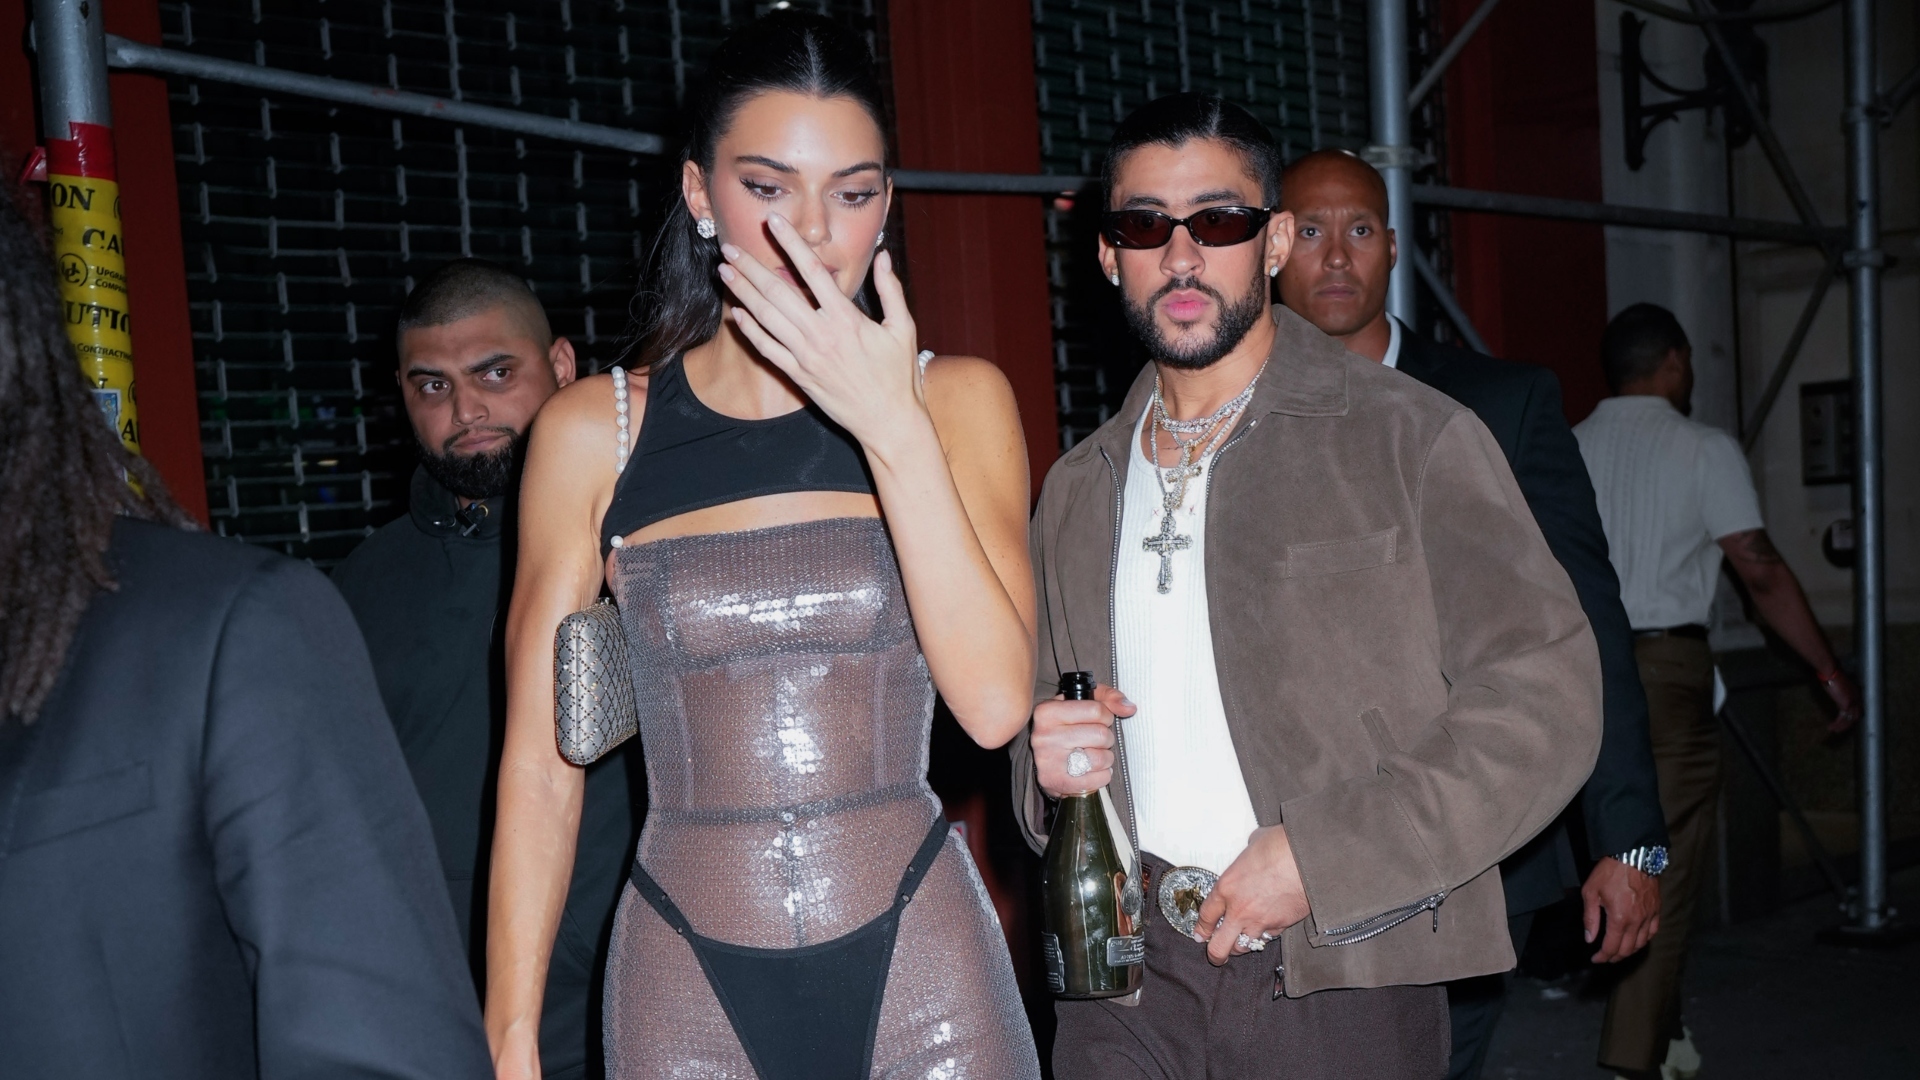 Kendall Jenner and Bad Bunny address break-up rumours